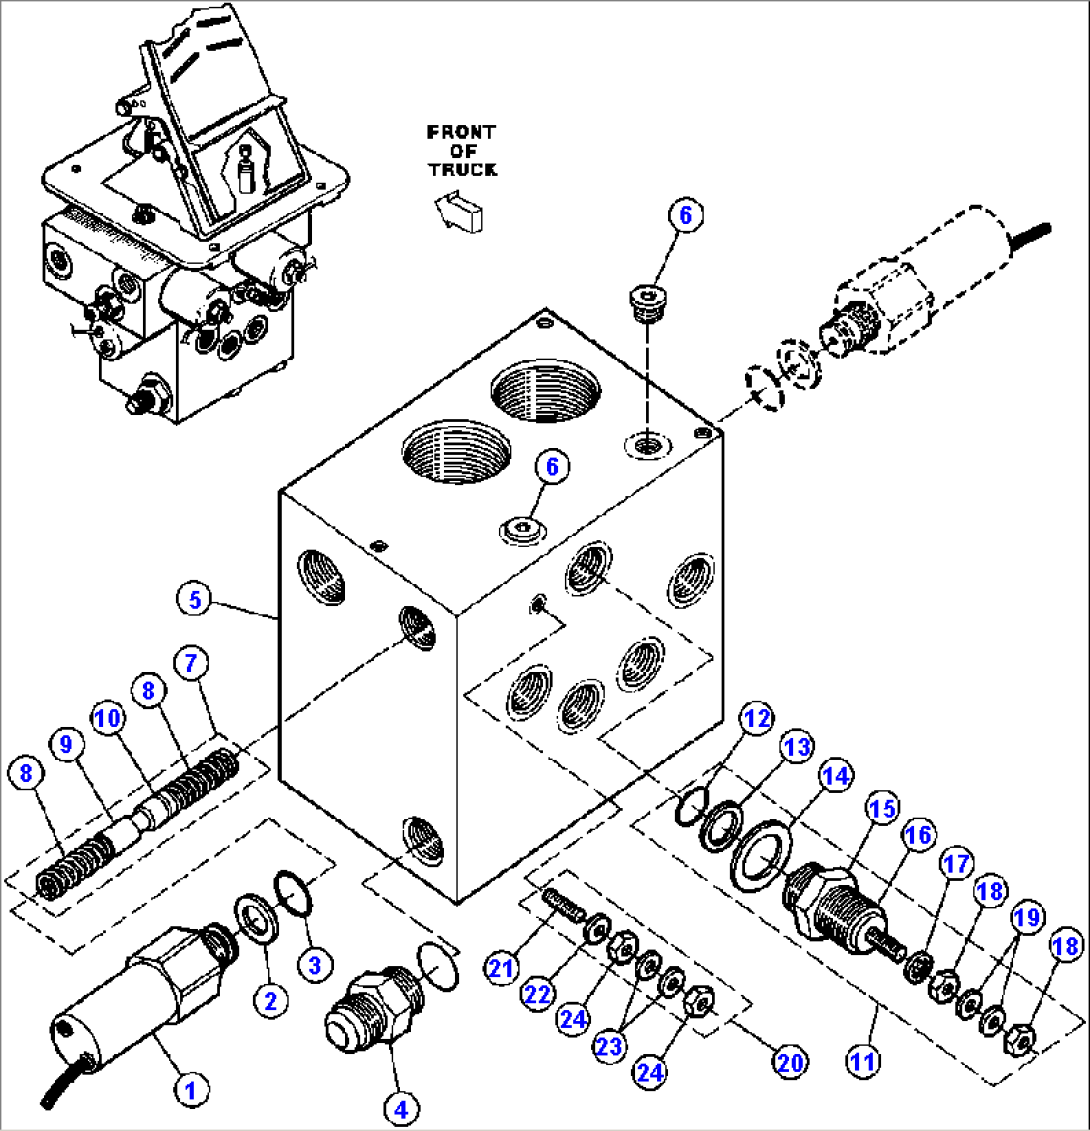 DUAL CONTROLLER SUB-ASSEMBLY - 1 (VE1249)